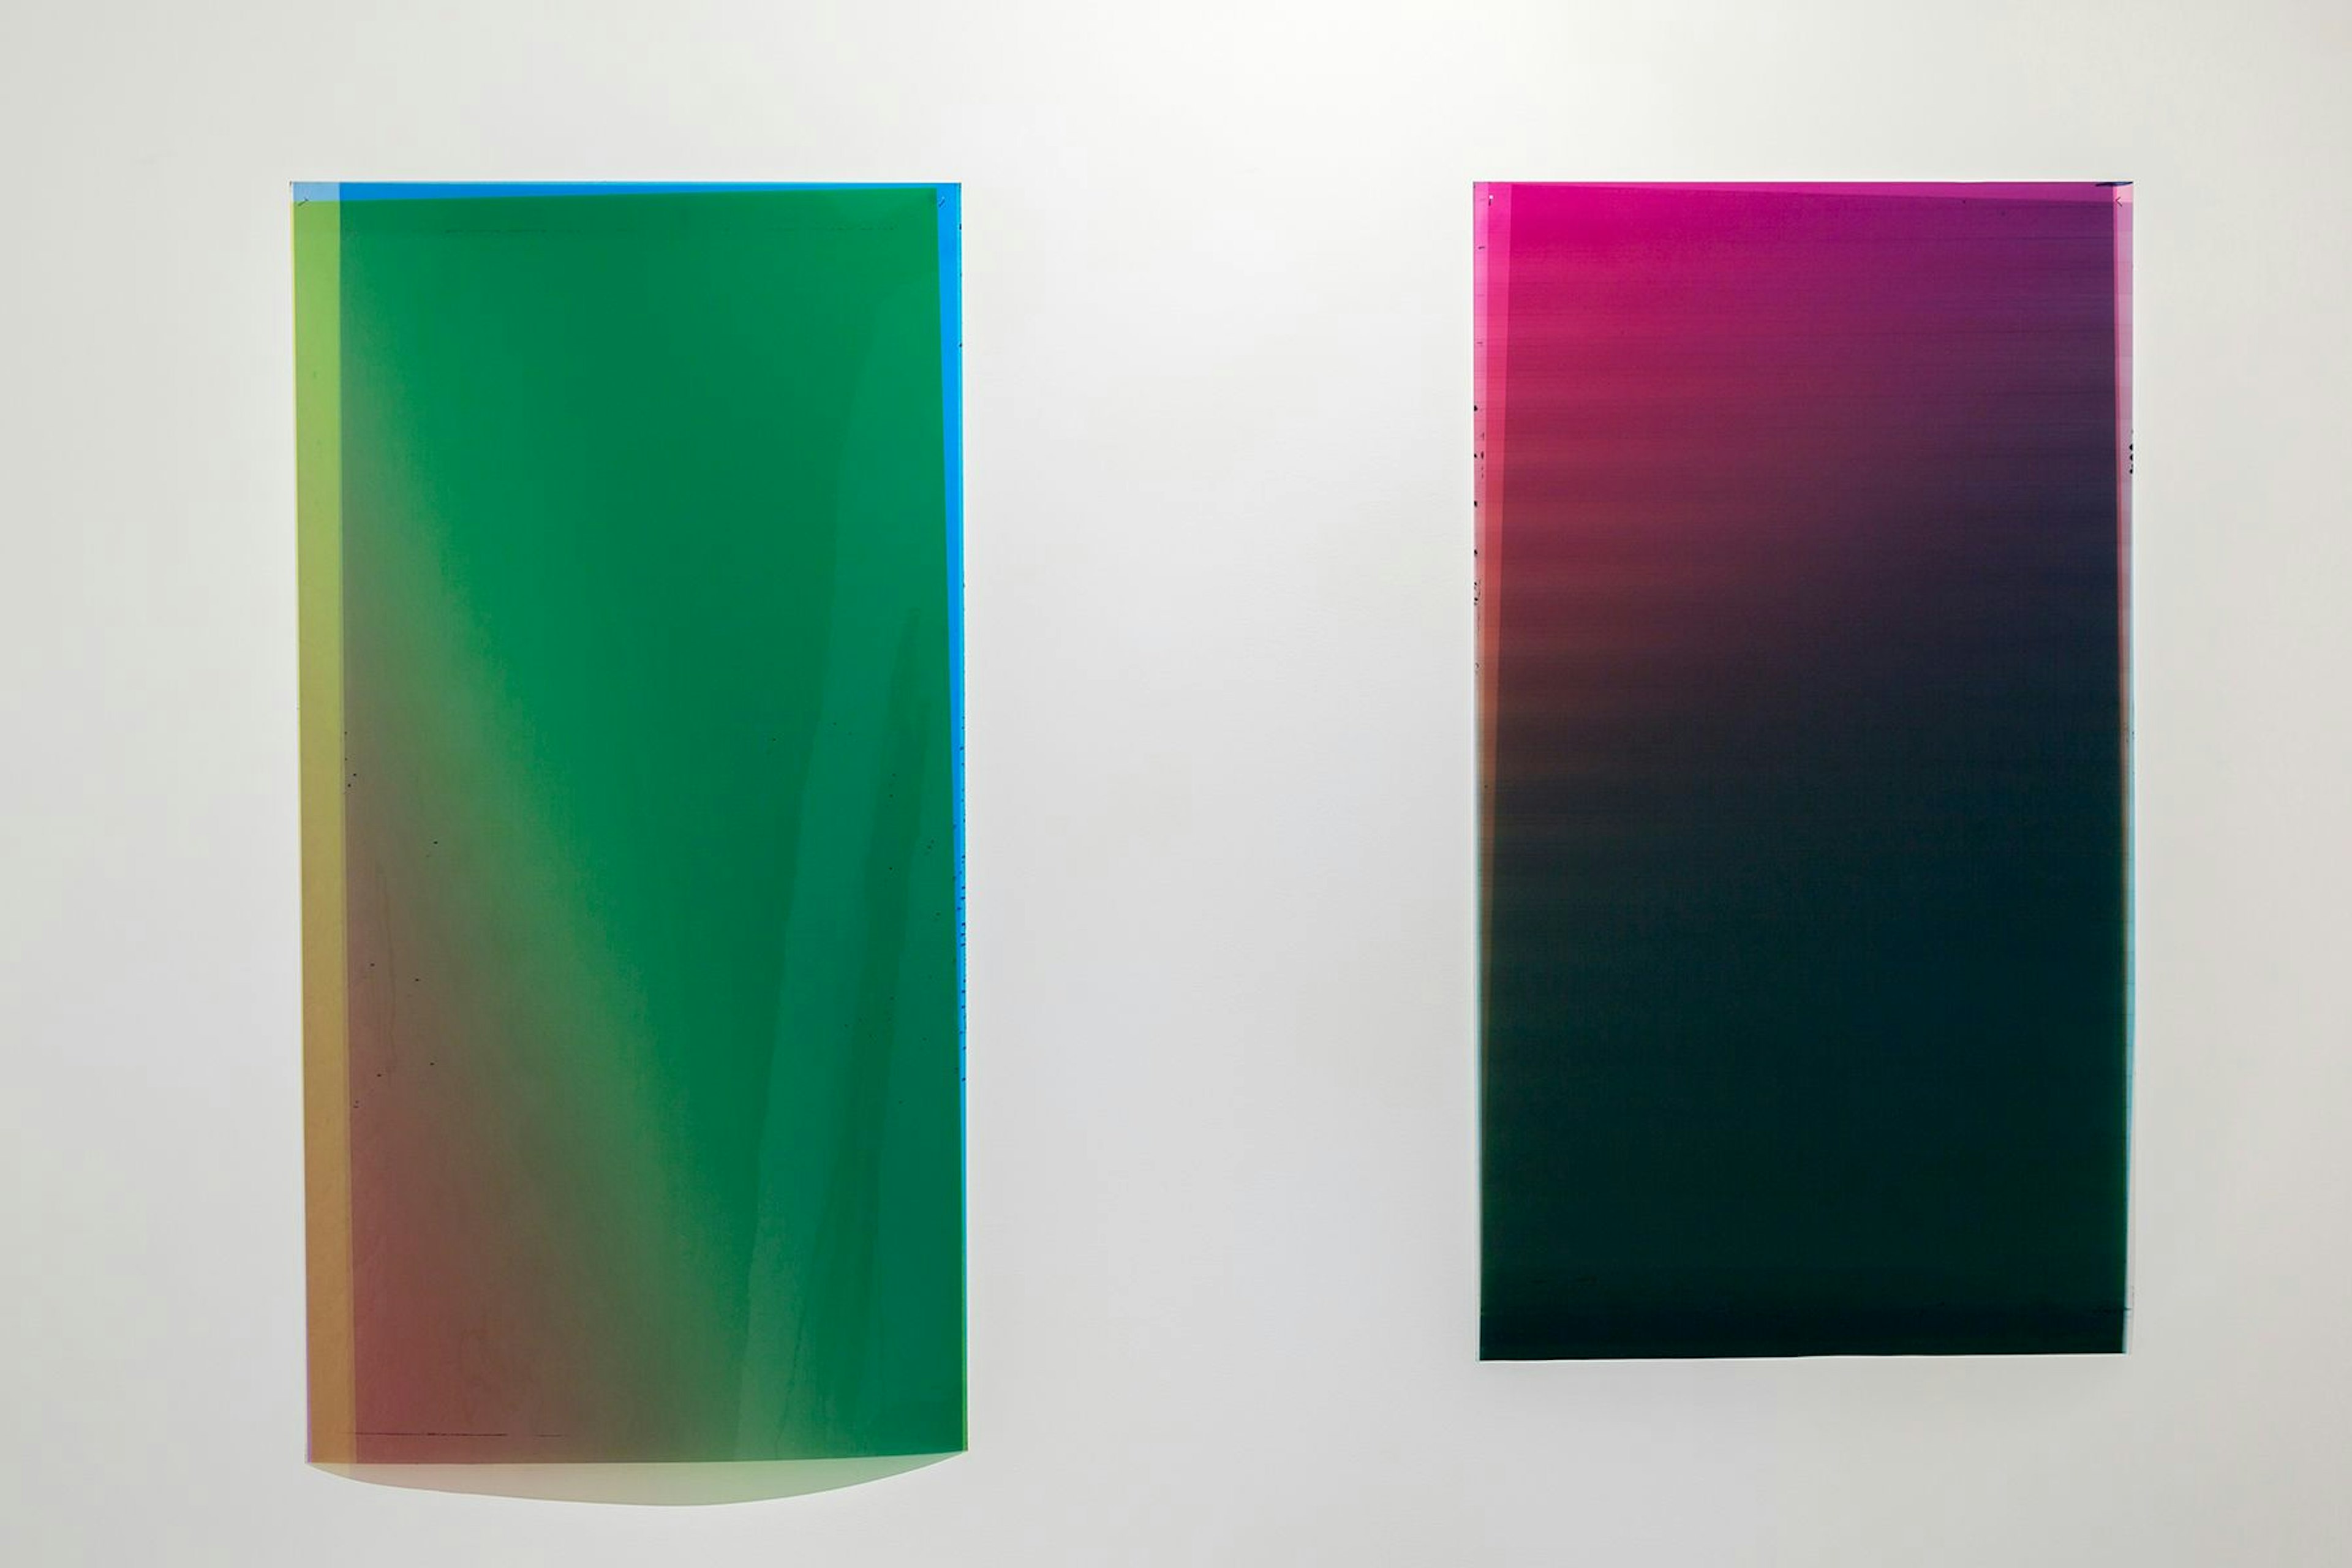 Caline Aoun, Untitled, 2013 and Untitled, 2013,